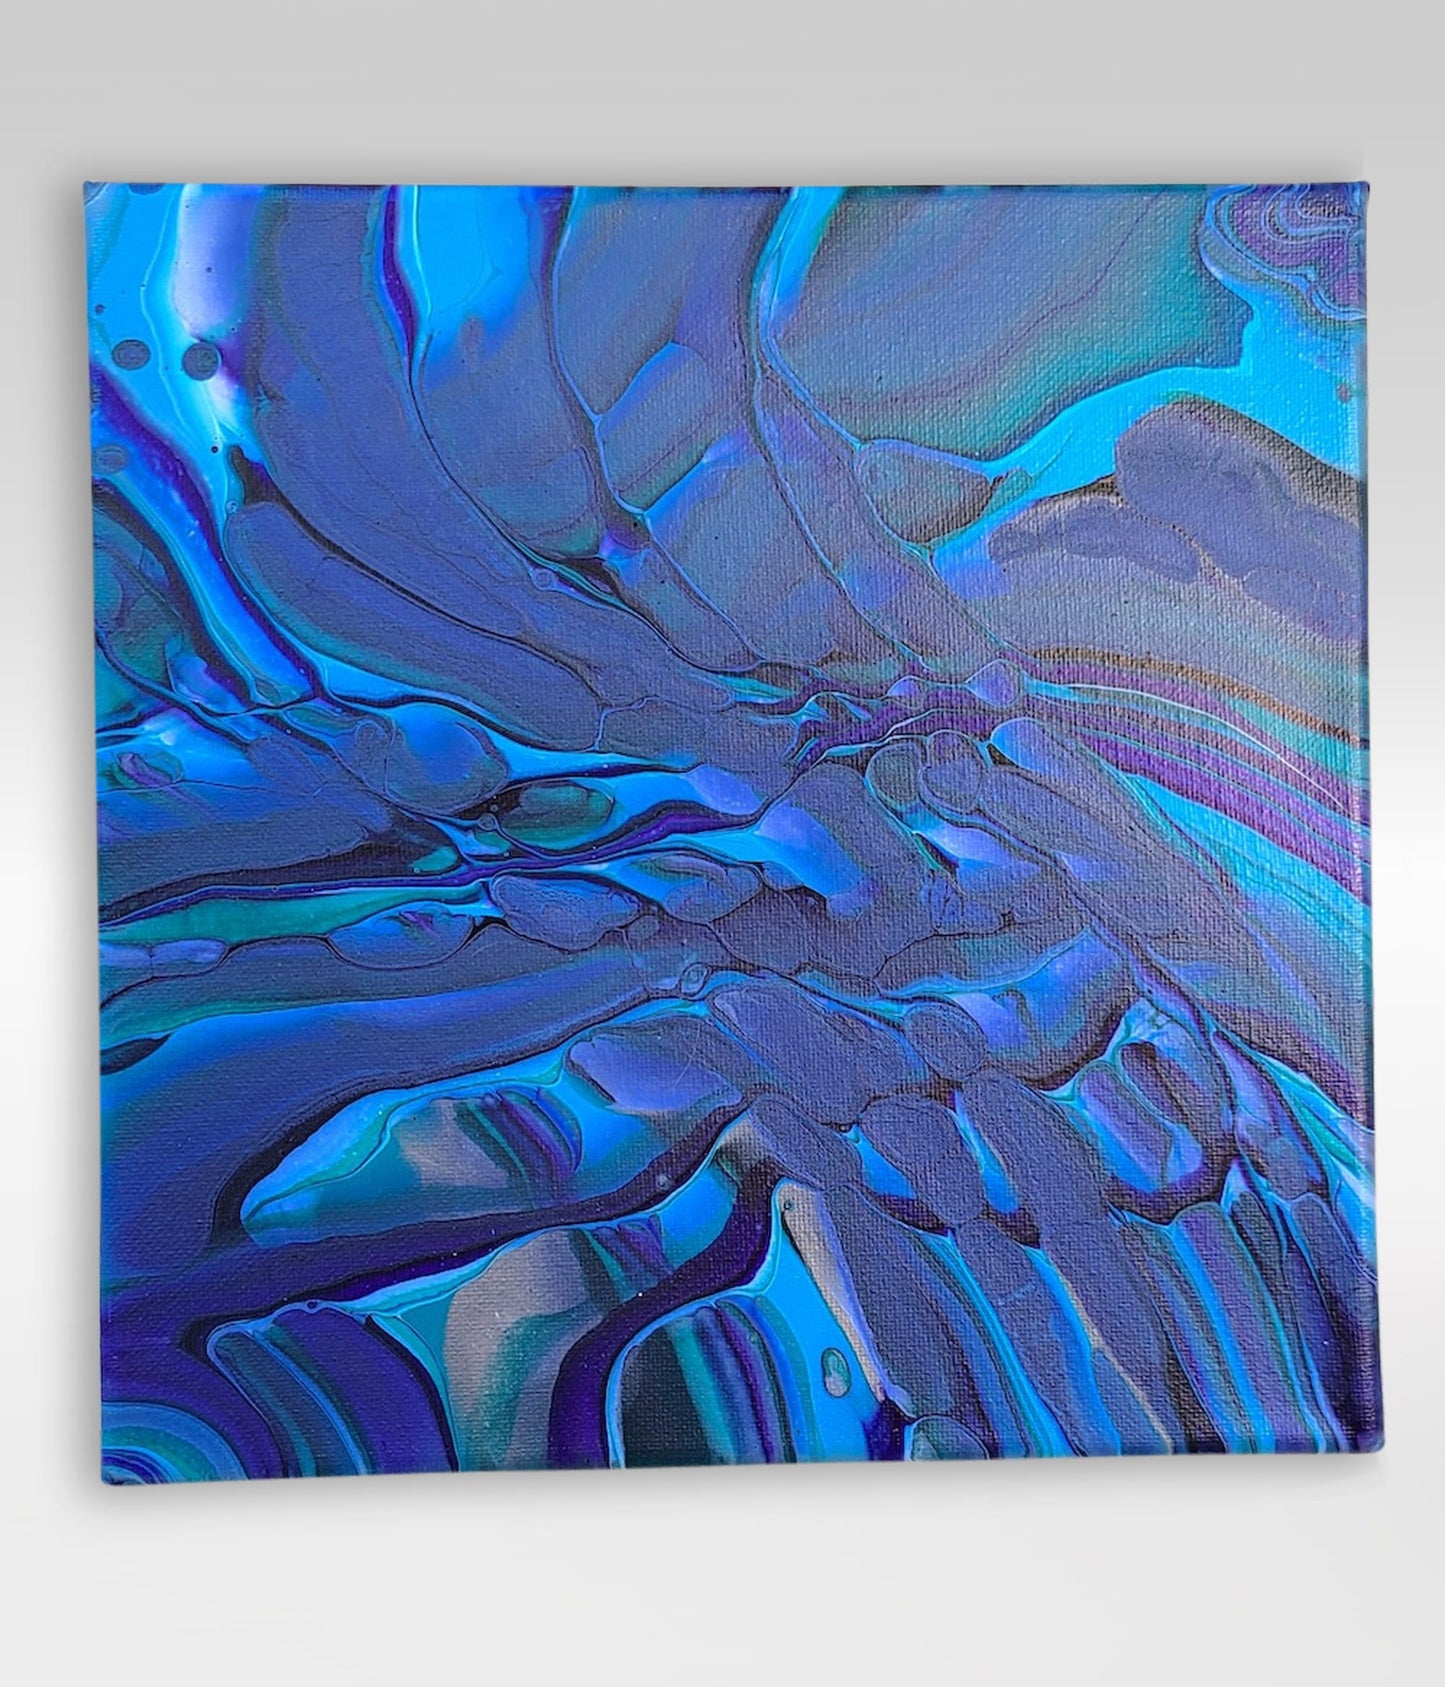 Handy – 10 x 10 Acrylic Pour Painting On Canvas